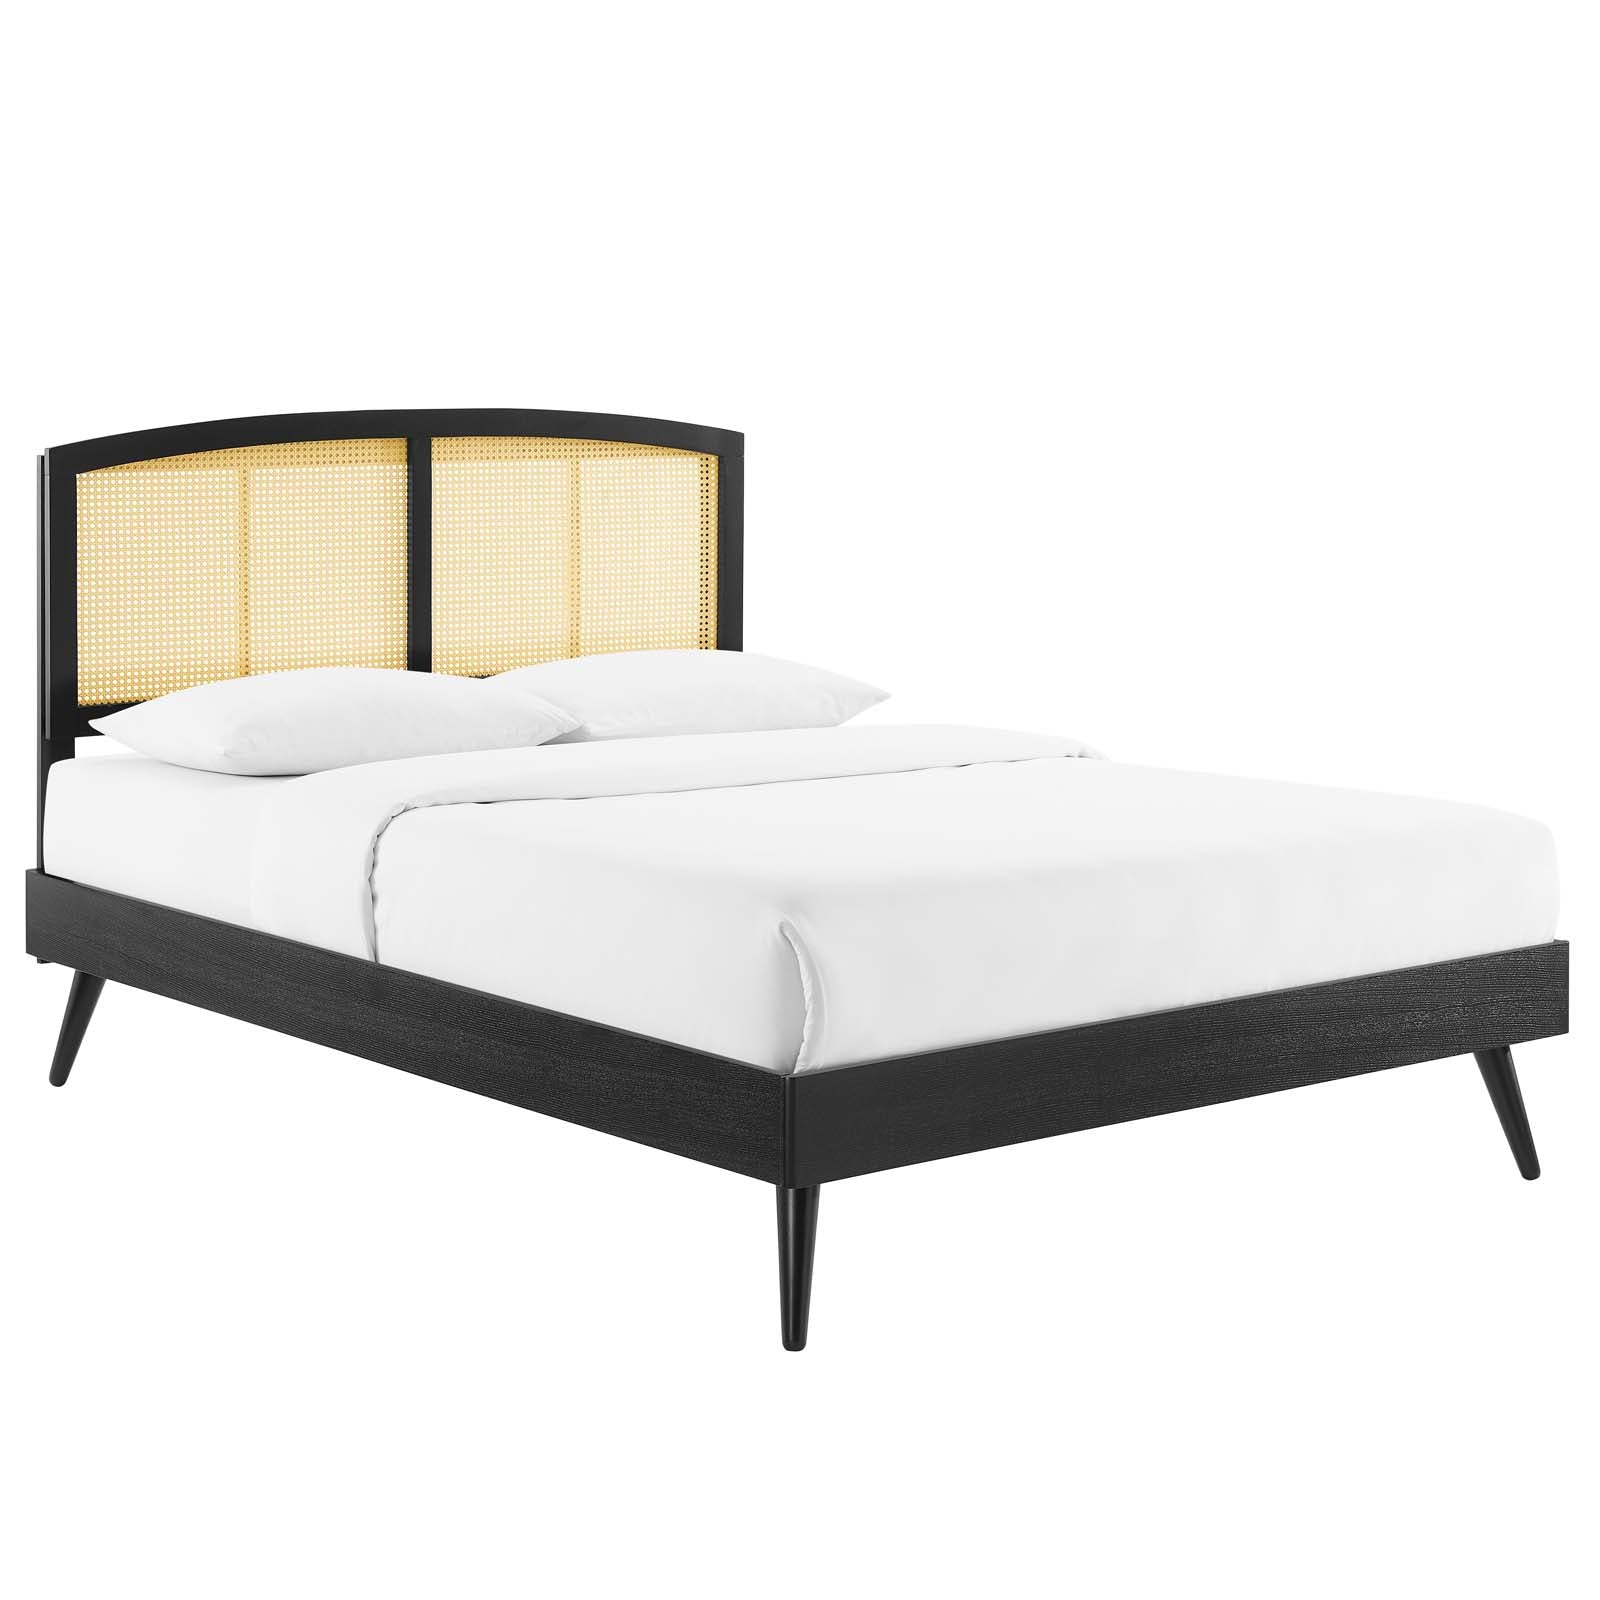 Modway Beds - Sierra-Cane-and-Wood-King-Platform-Bed-With-Splayed-Legs-Black